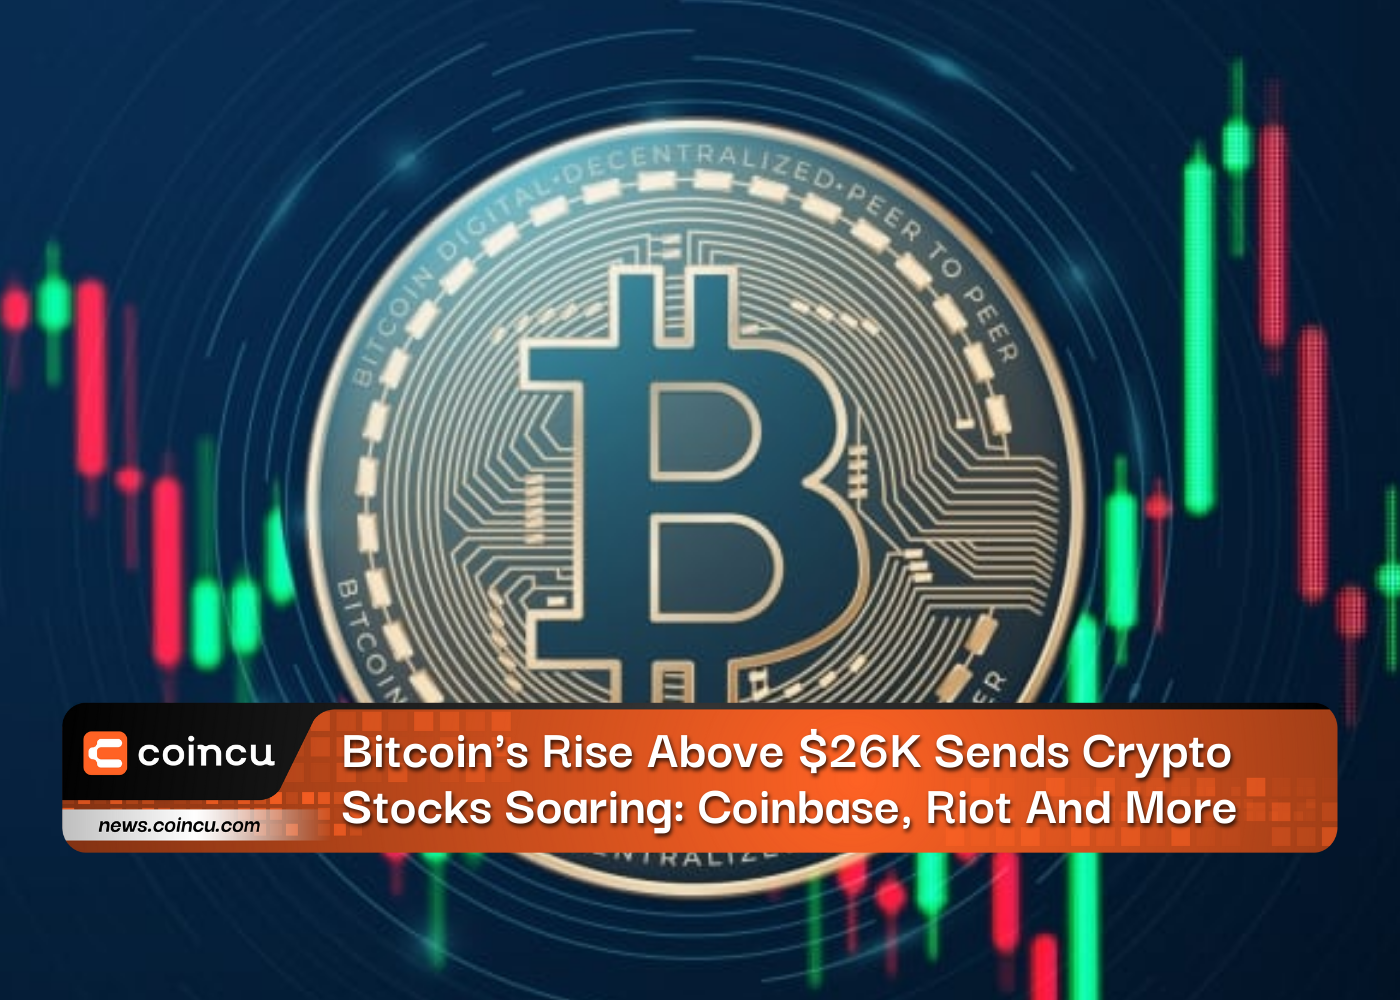 Bitcoin's Rise Above $26K Sends Crypto Stocks Soaring: Coinbase, Riot And More